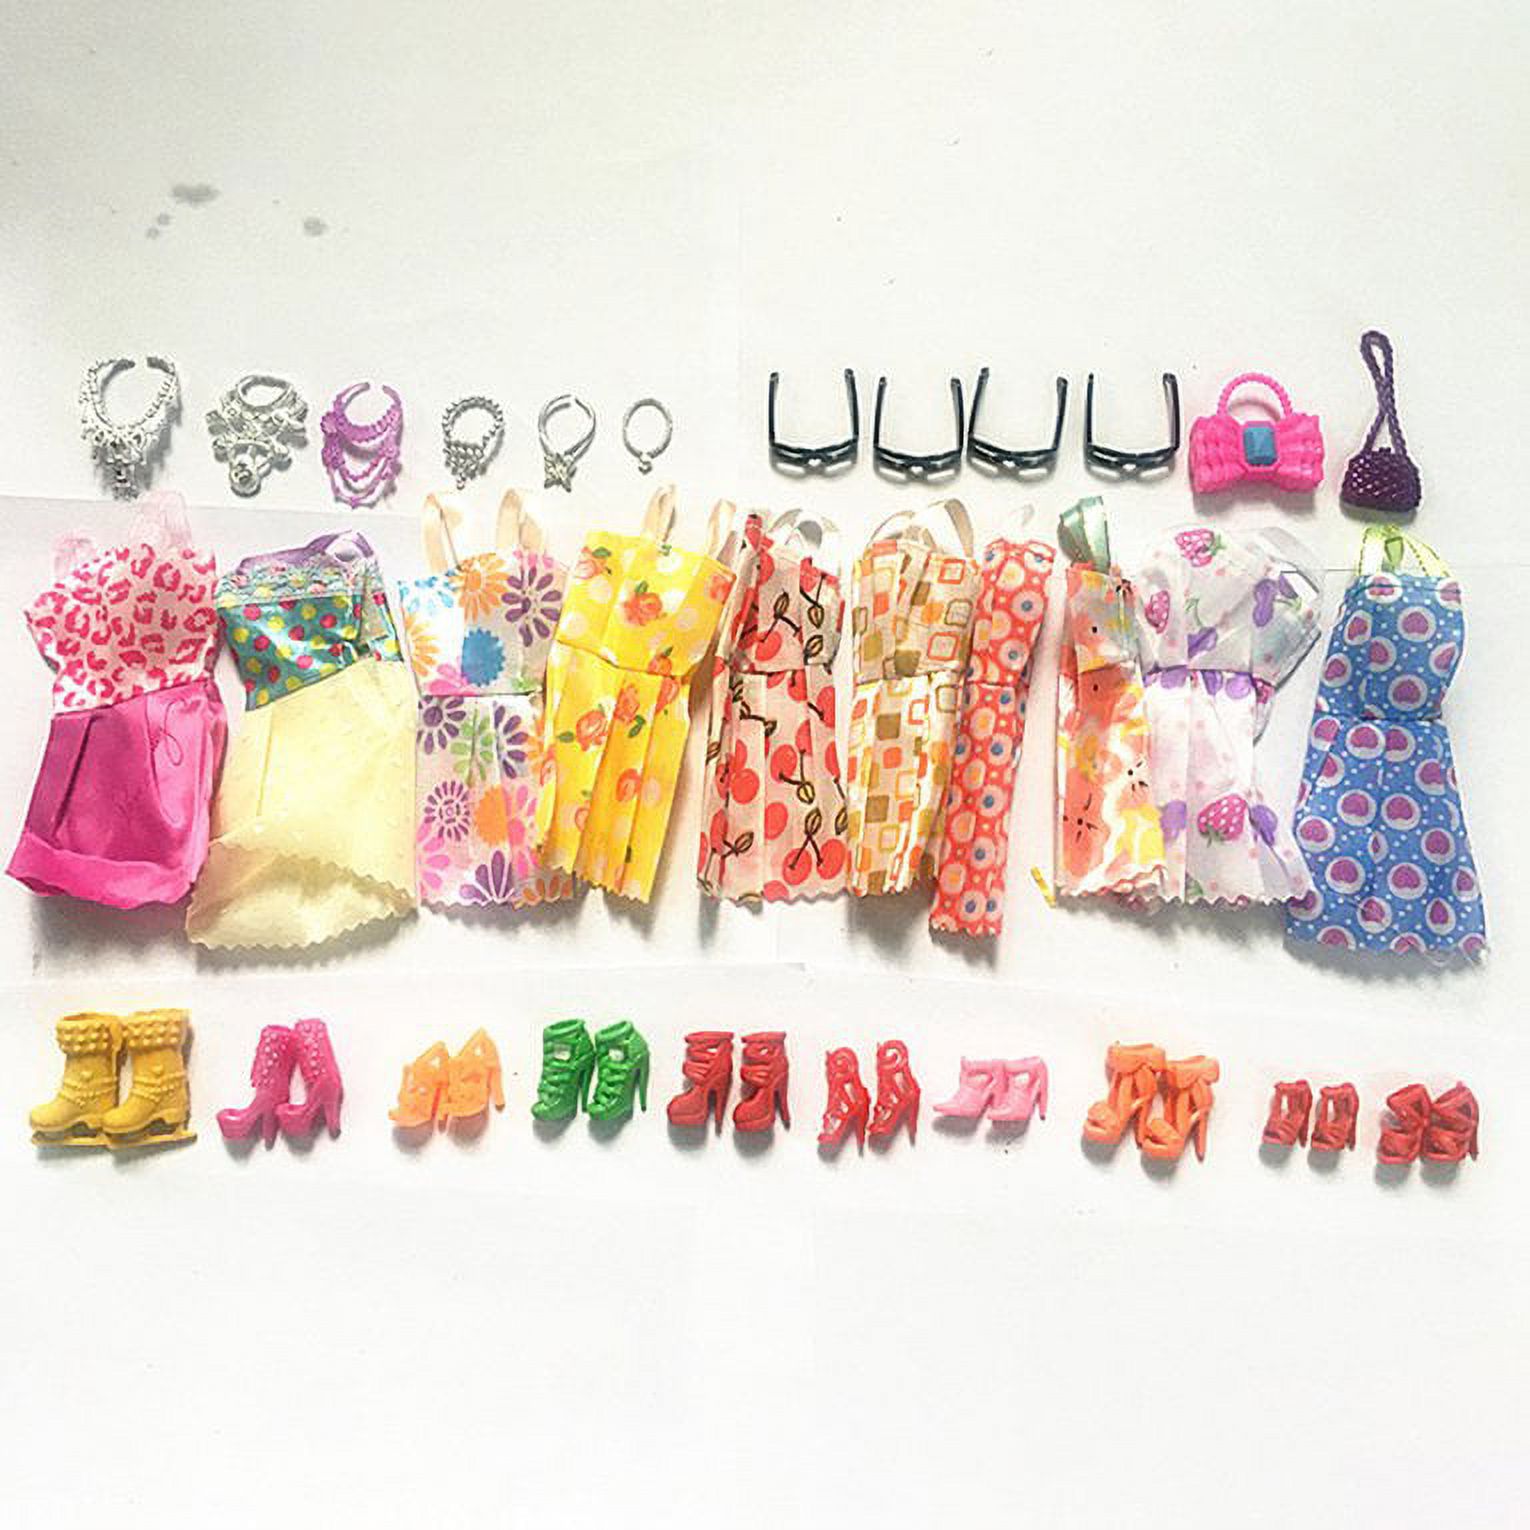 Christmas Kids Gift Clearance！Girl Cute Funny Fashion Toy 32 Item/Set Doll Accessories Clothes For Barbies Doll Kids Toy Christmas Tree Decoration Gifts Christmas Tree Decoration Gift - image 5 of 8